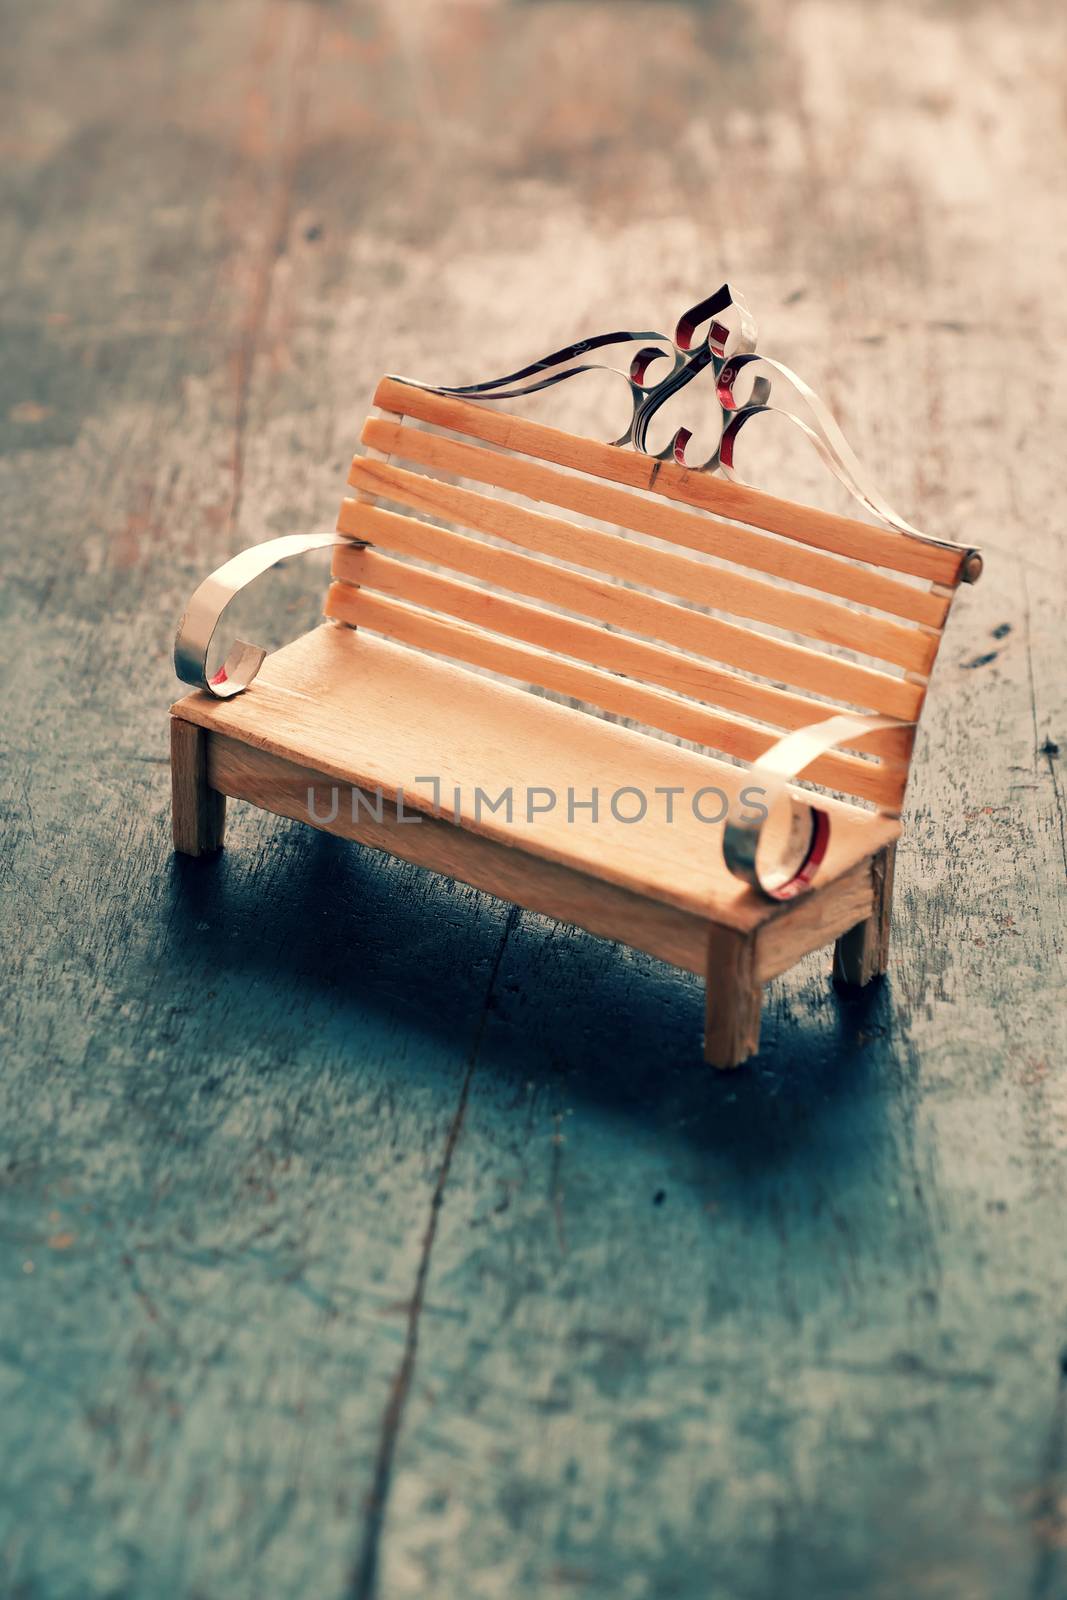 mini furniture, cute small chair by xuanhuongho